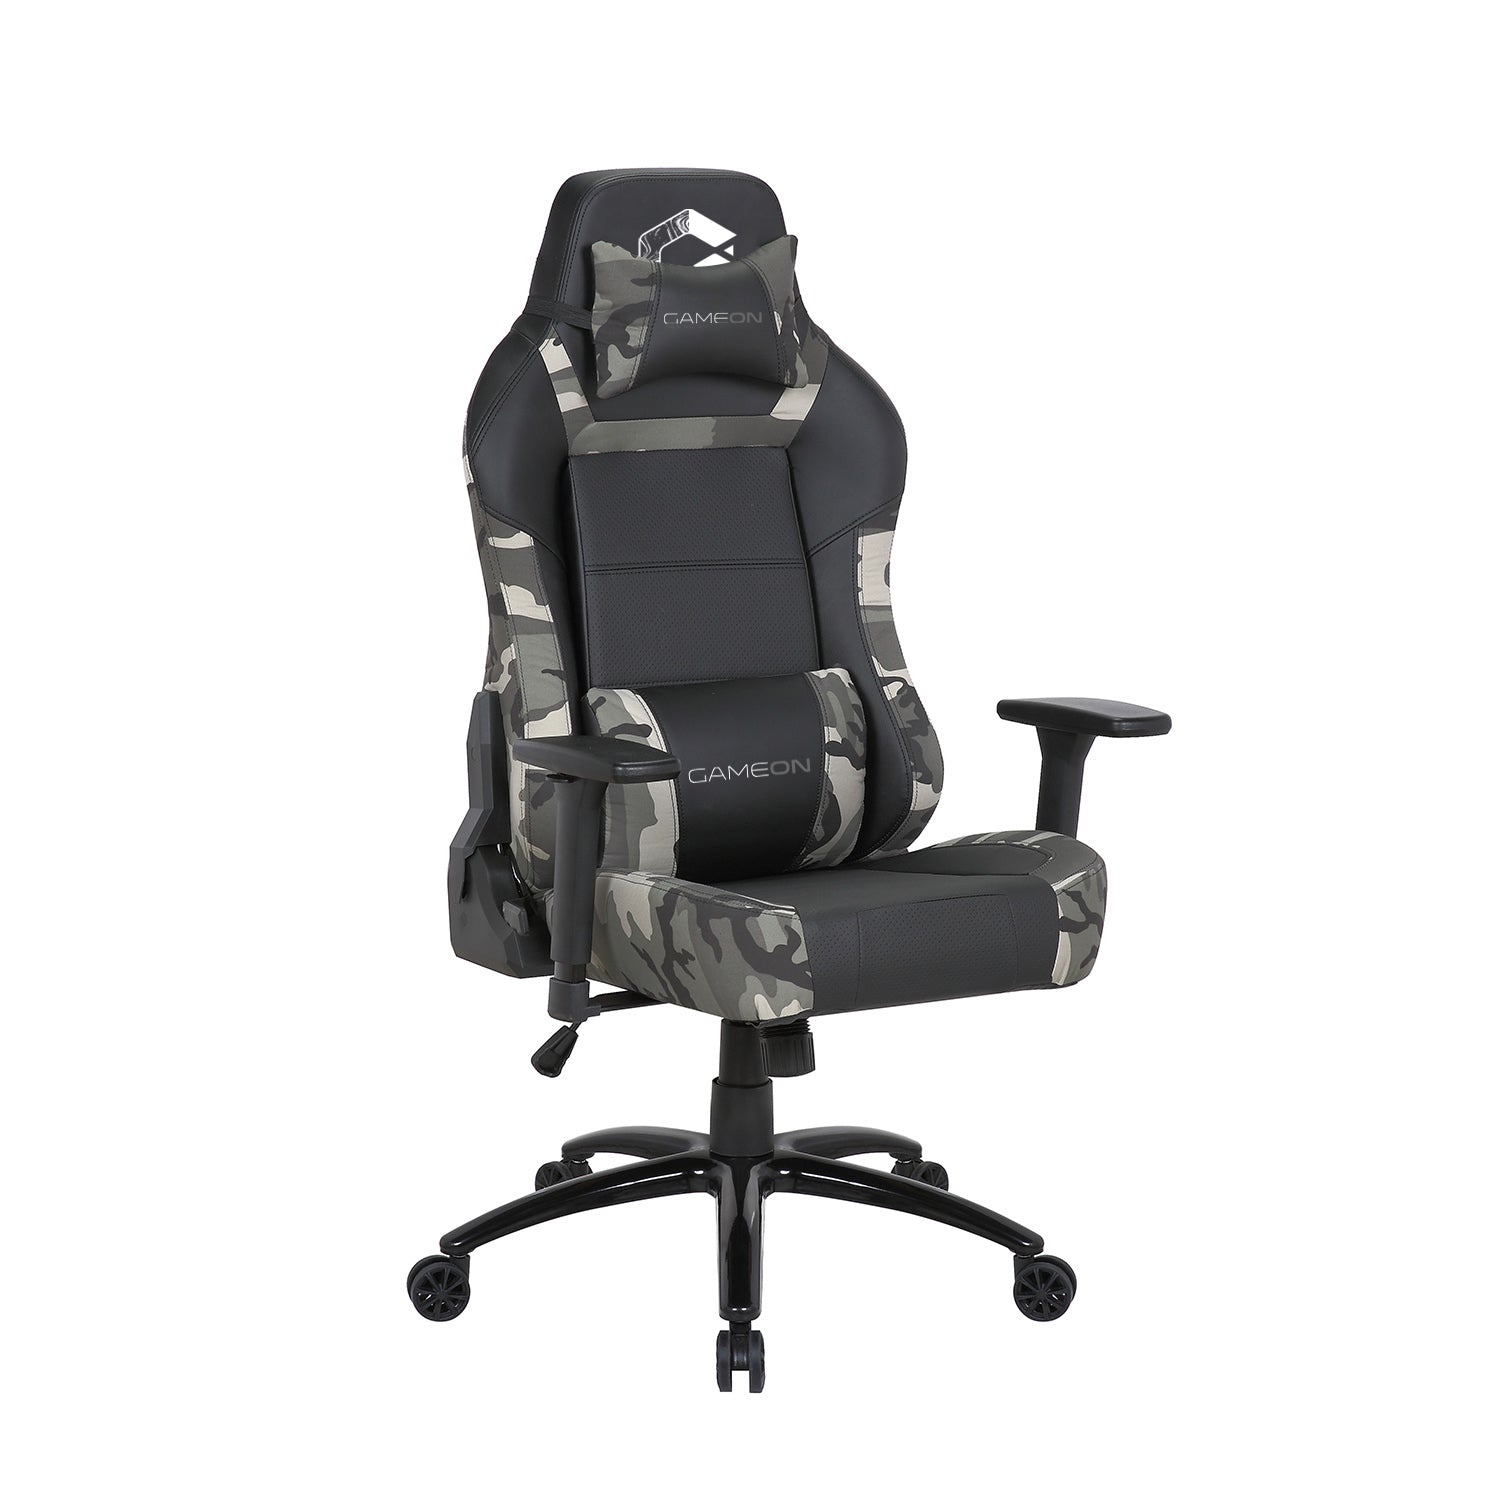 Game On Gaming Chair - Black/Gray Camo, 3D Arm Rest, Backrest, Head Pillow, Lumbar